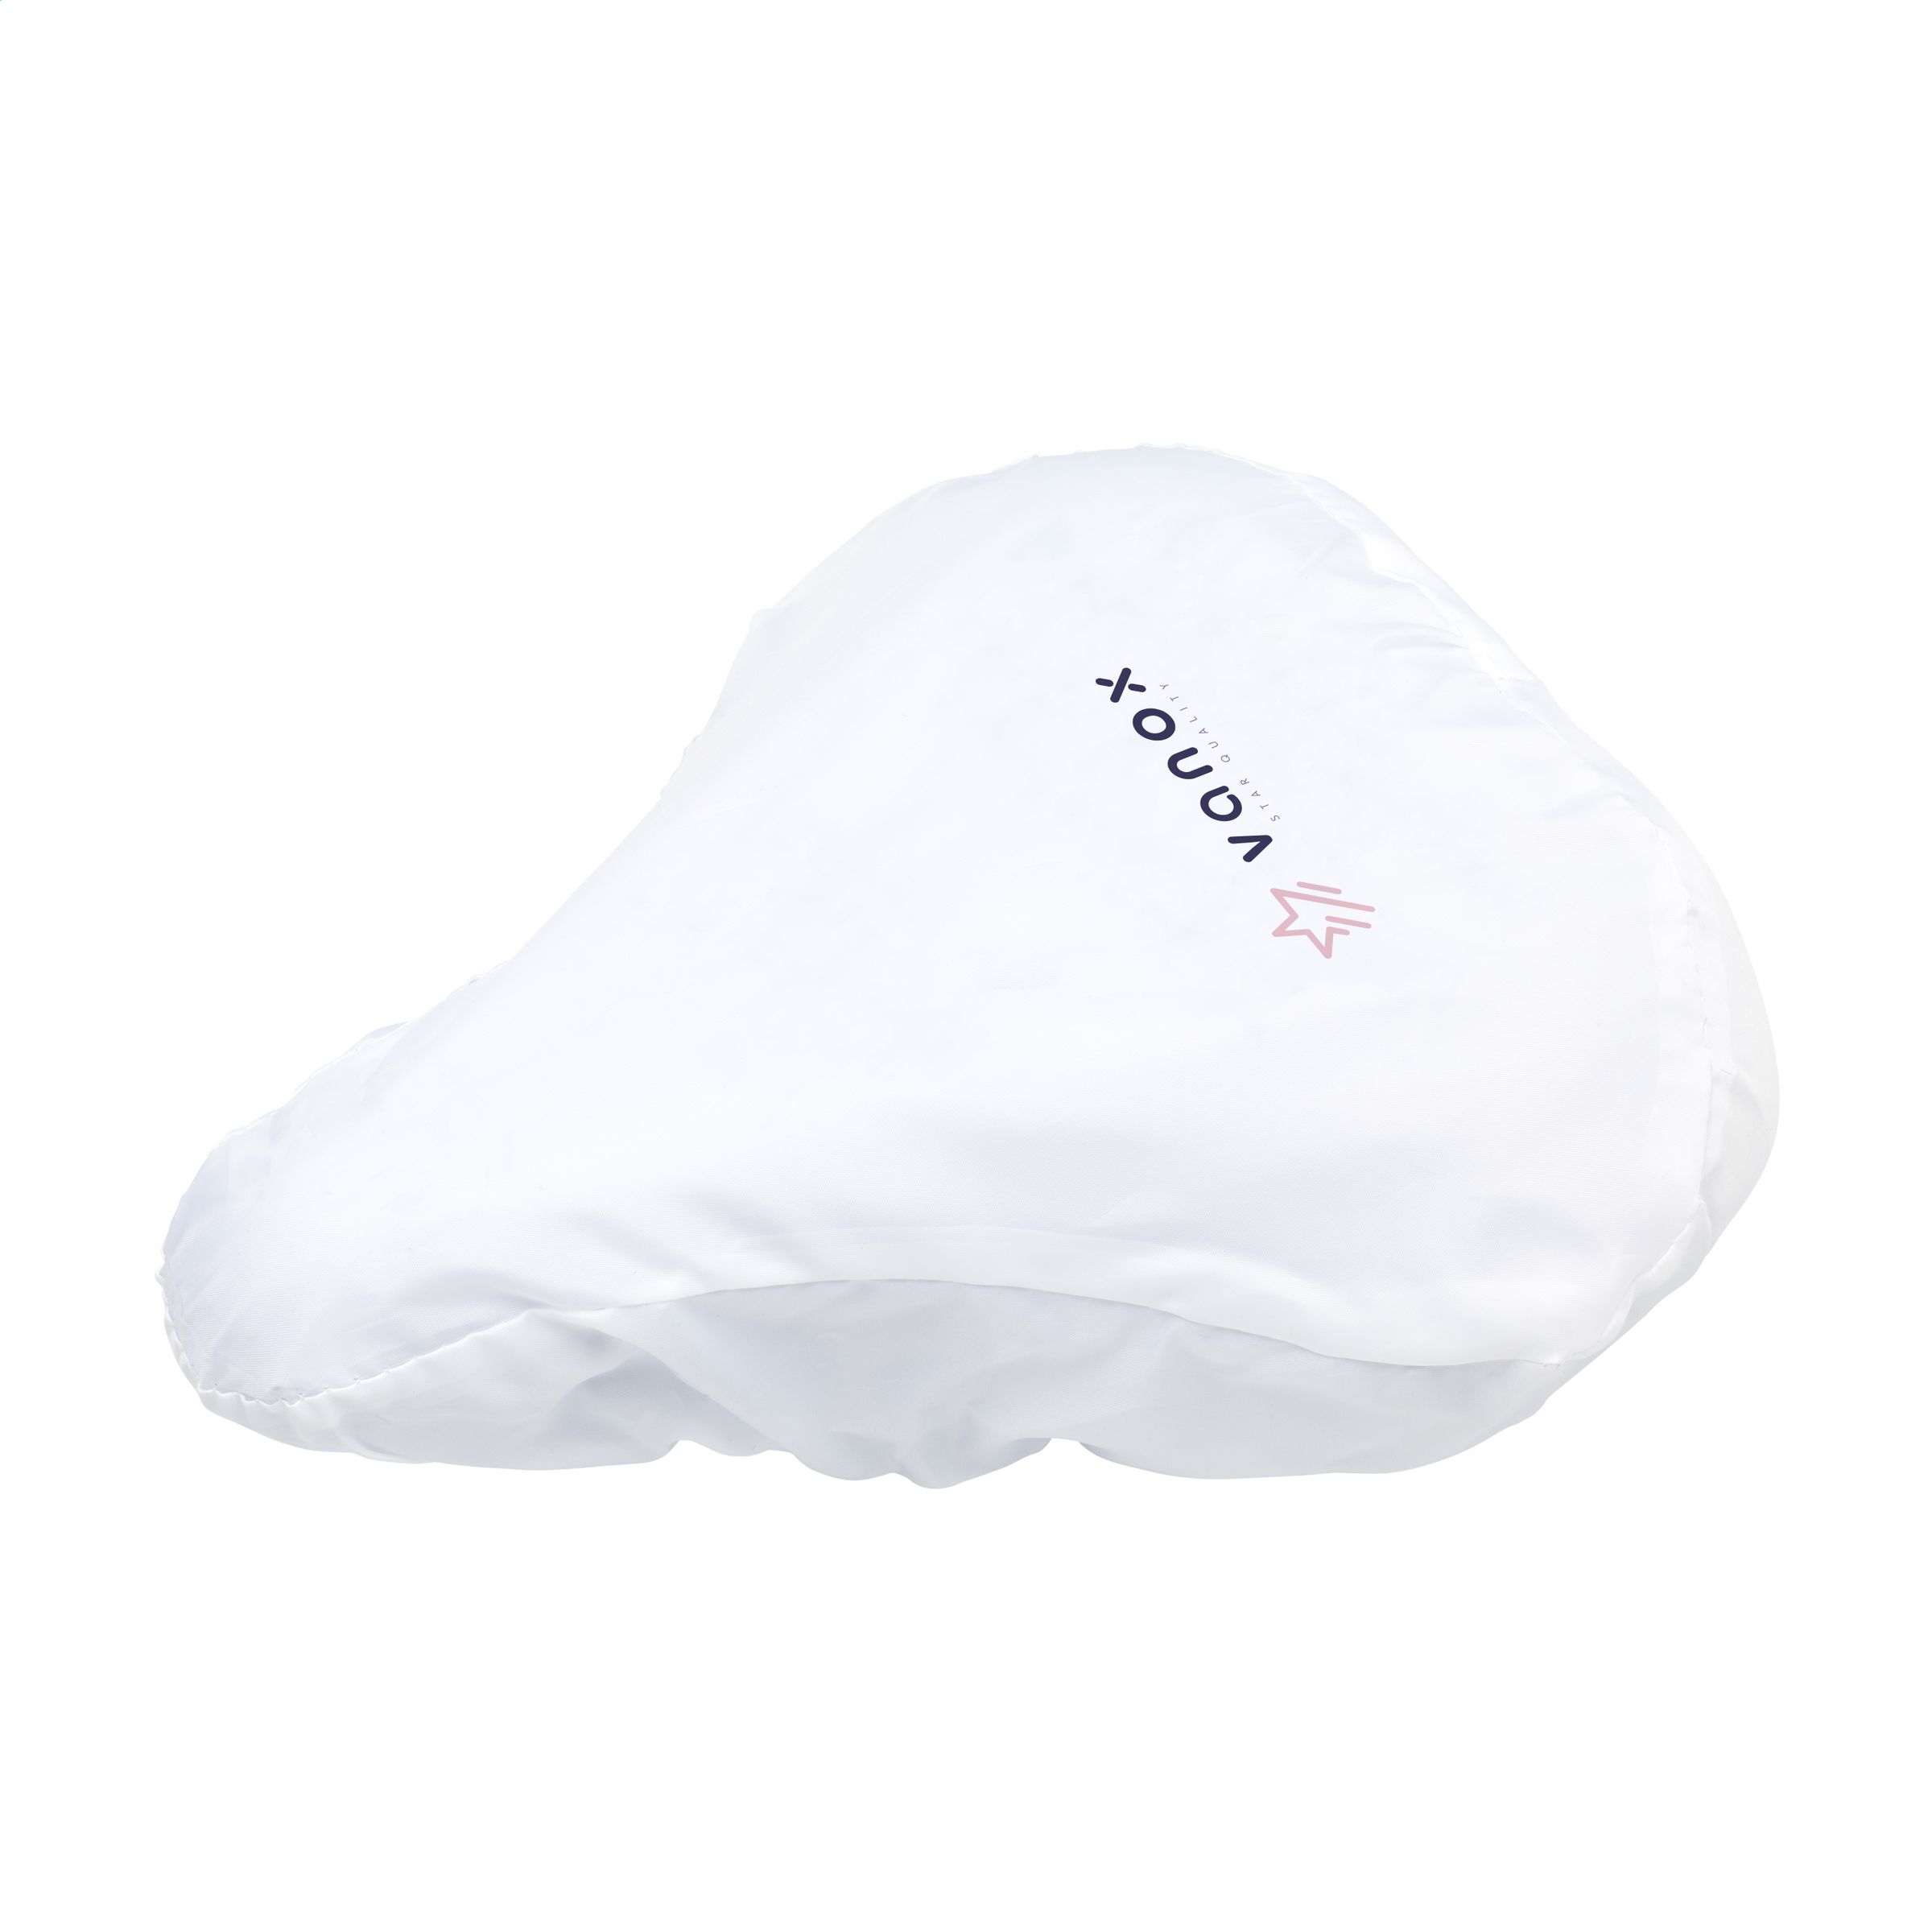 RPET Bicycle Seat Cover - Rochdale